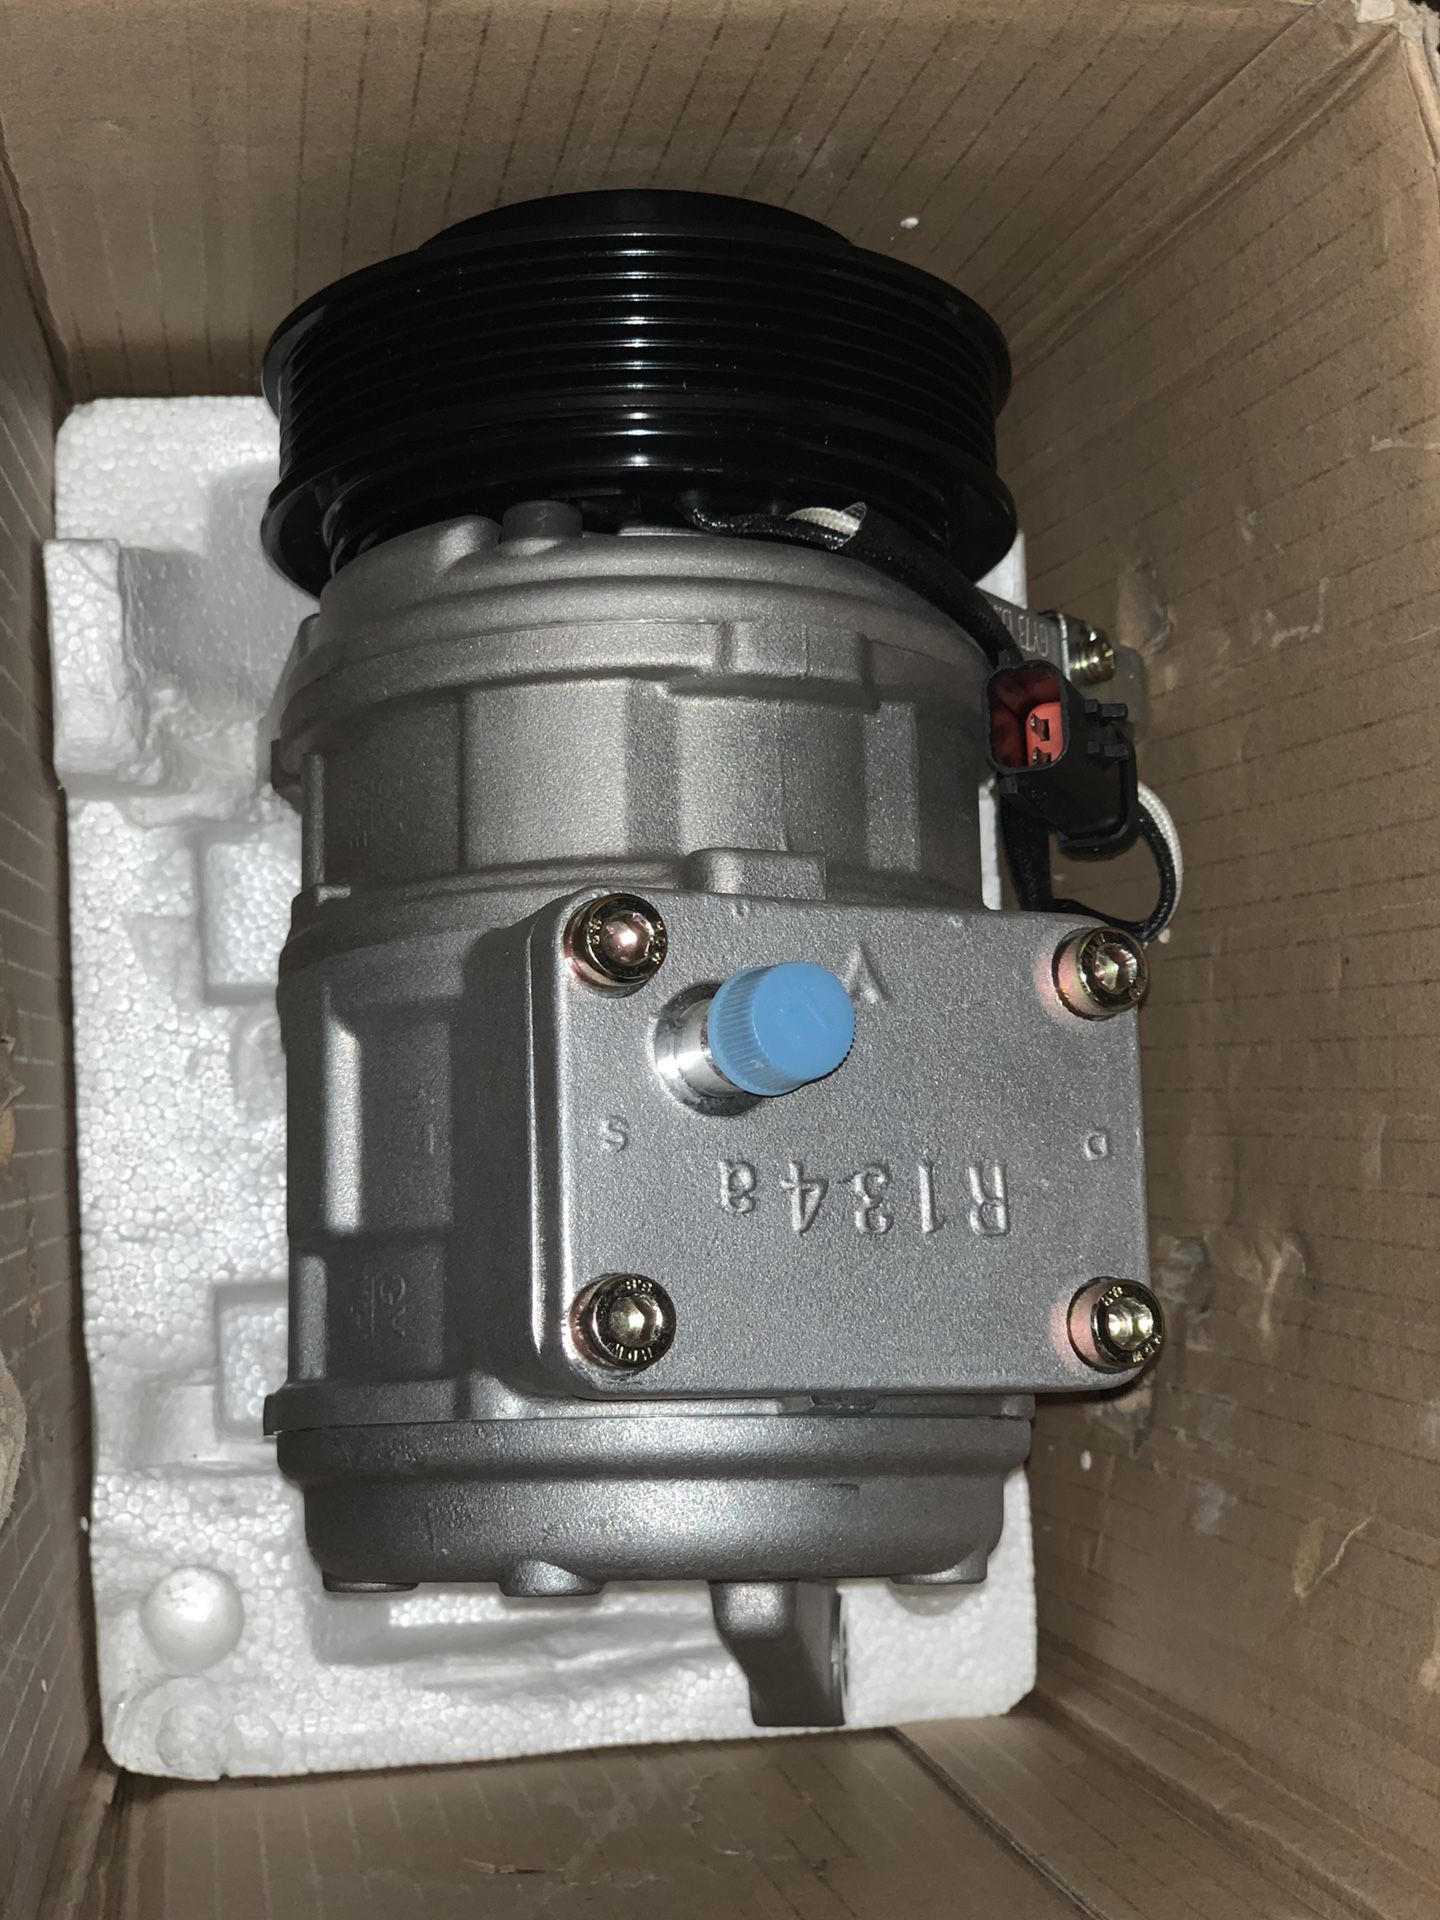 AC compressor for Chrysler town and country 1996